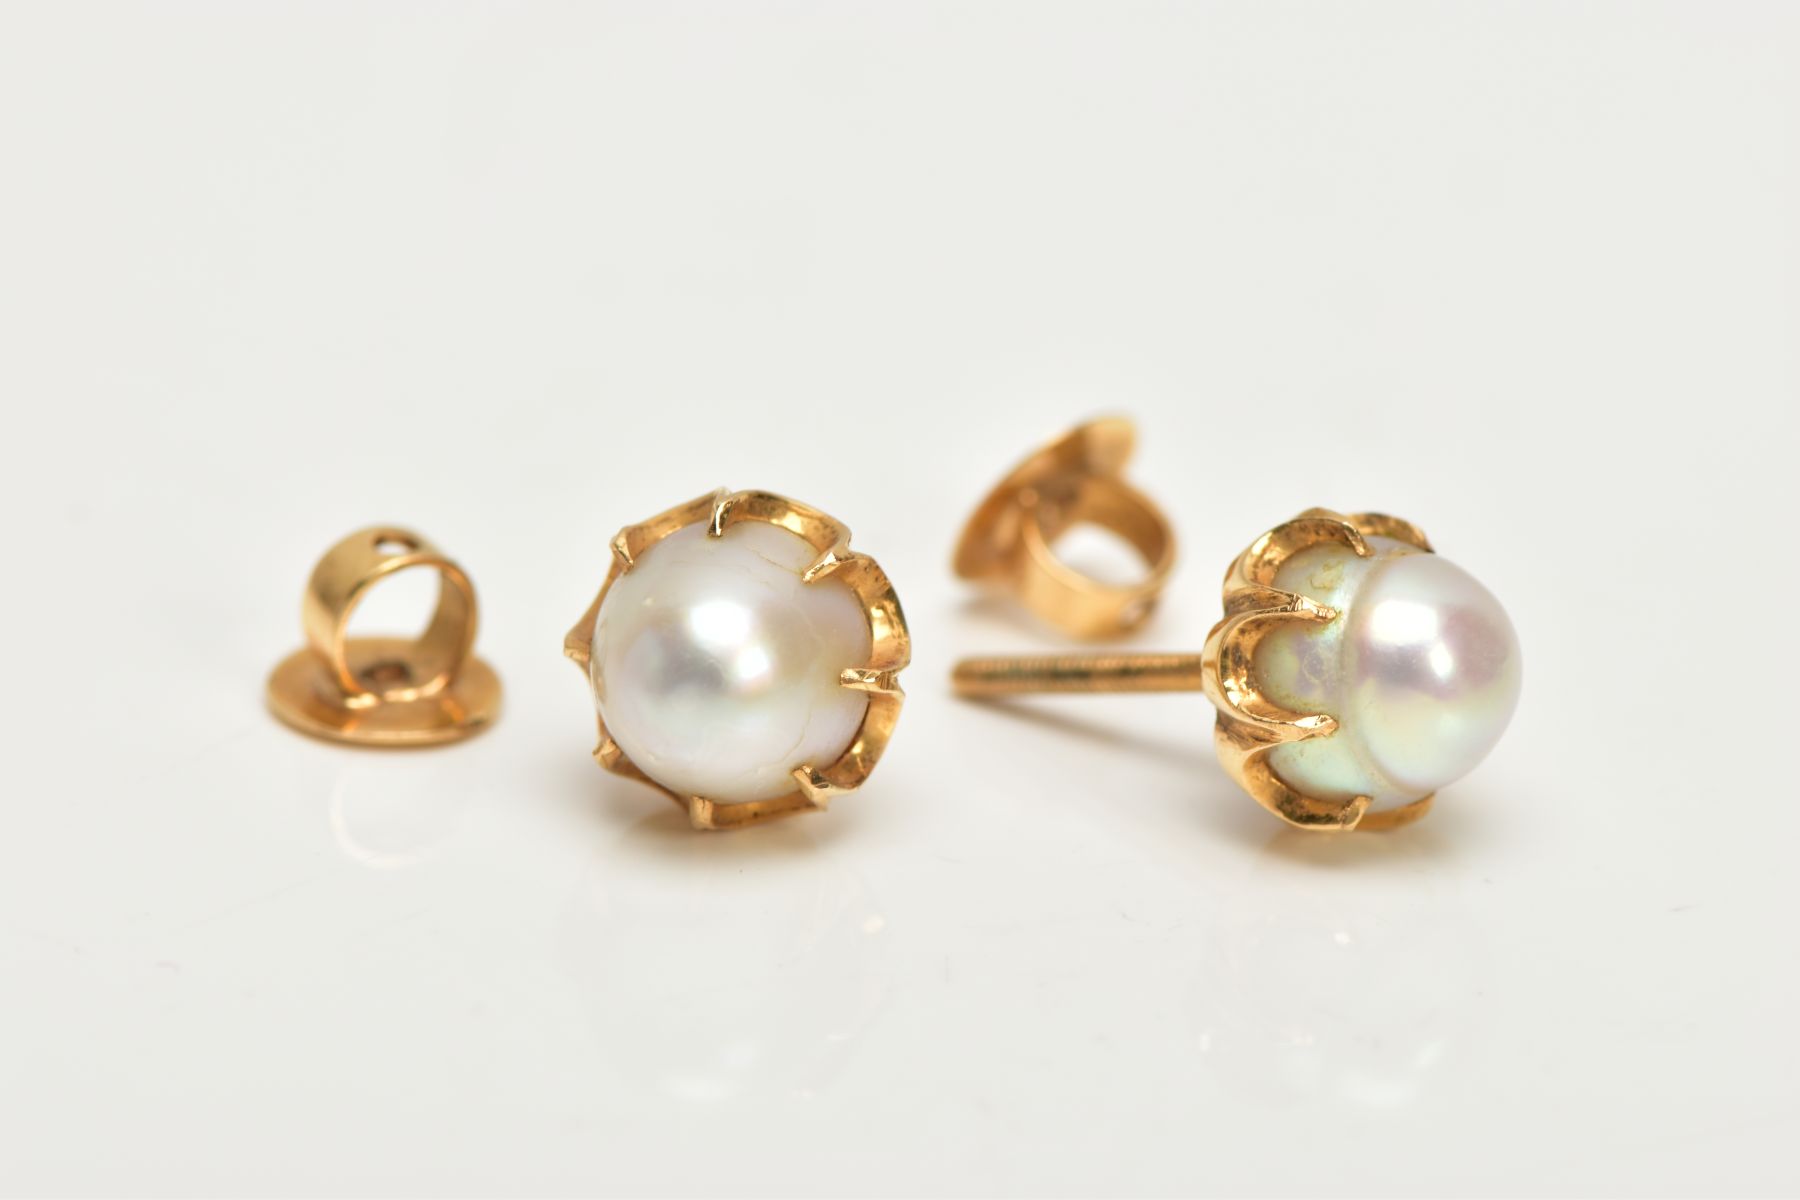 A PAIR OF YELLOW METAL CULTURED PEARL EARRINGS, each ear stud set with a cultured pearl, measuring - Bild 2 aus 3